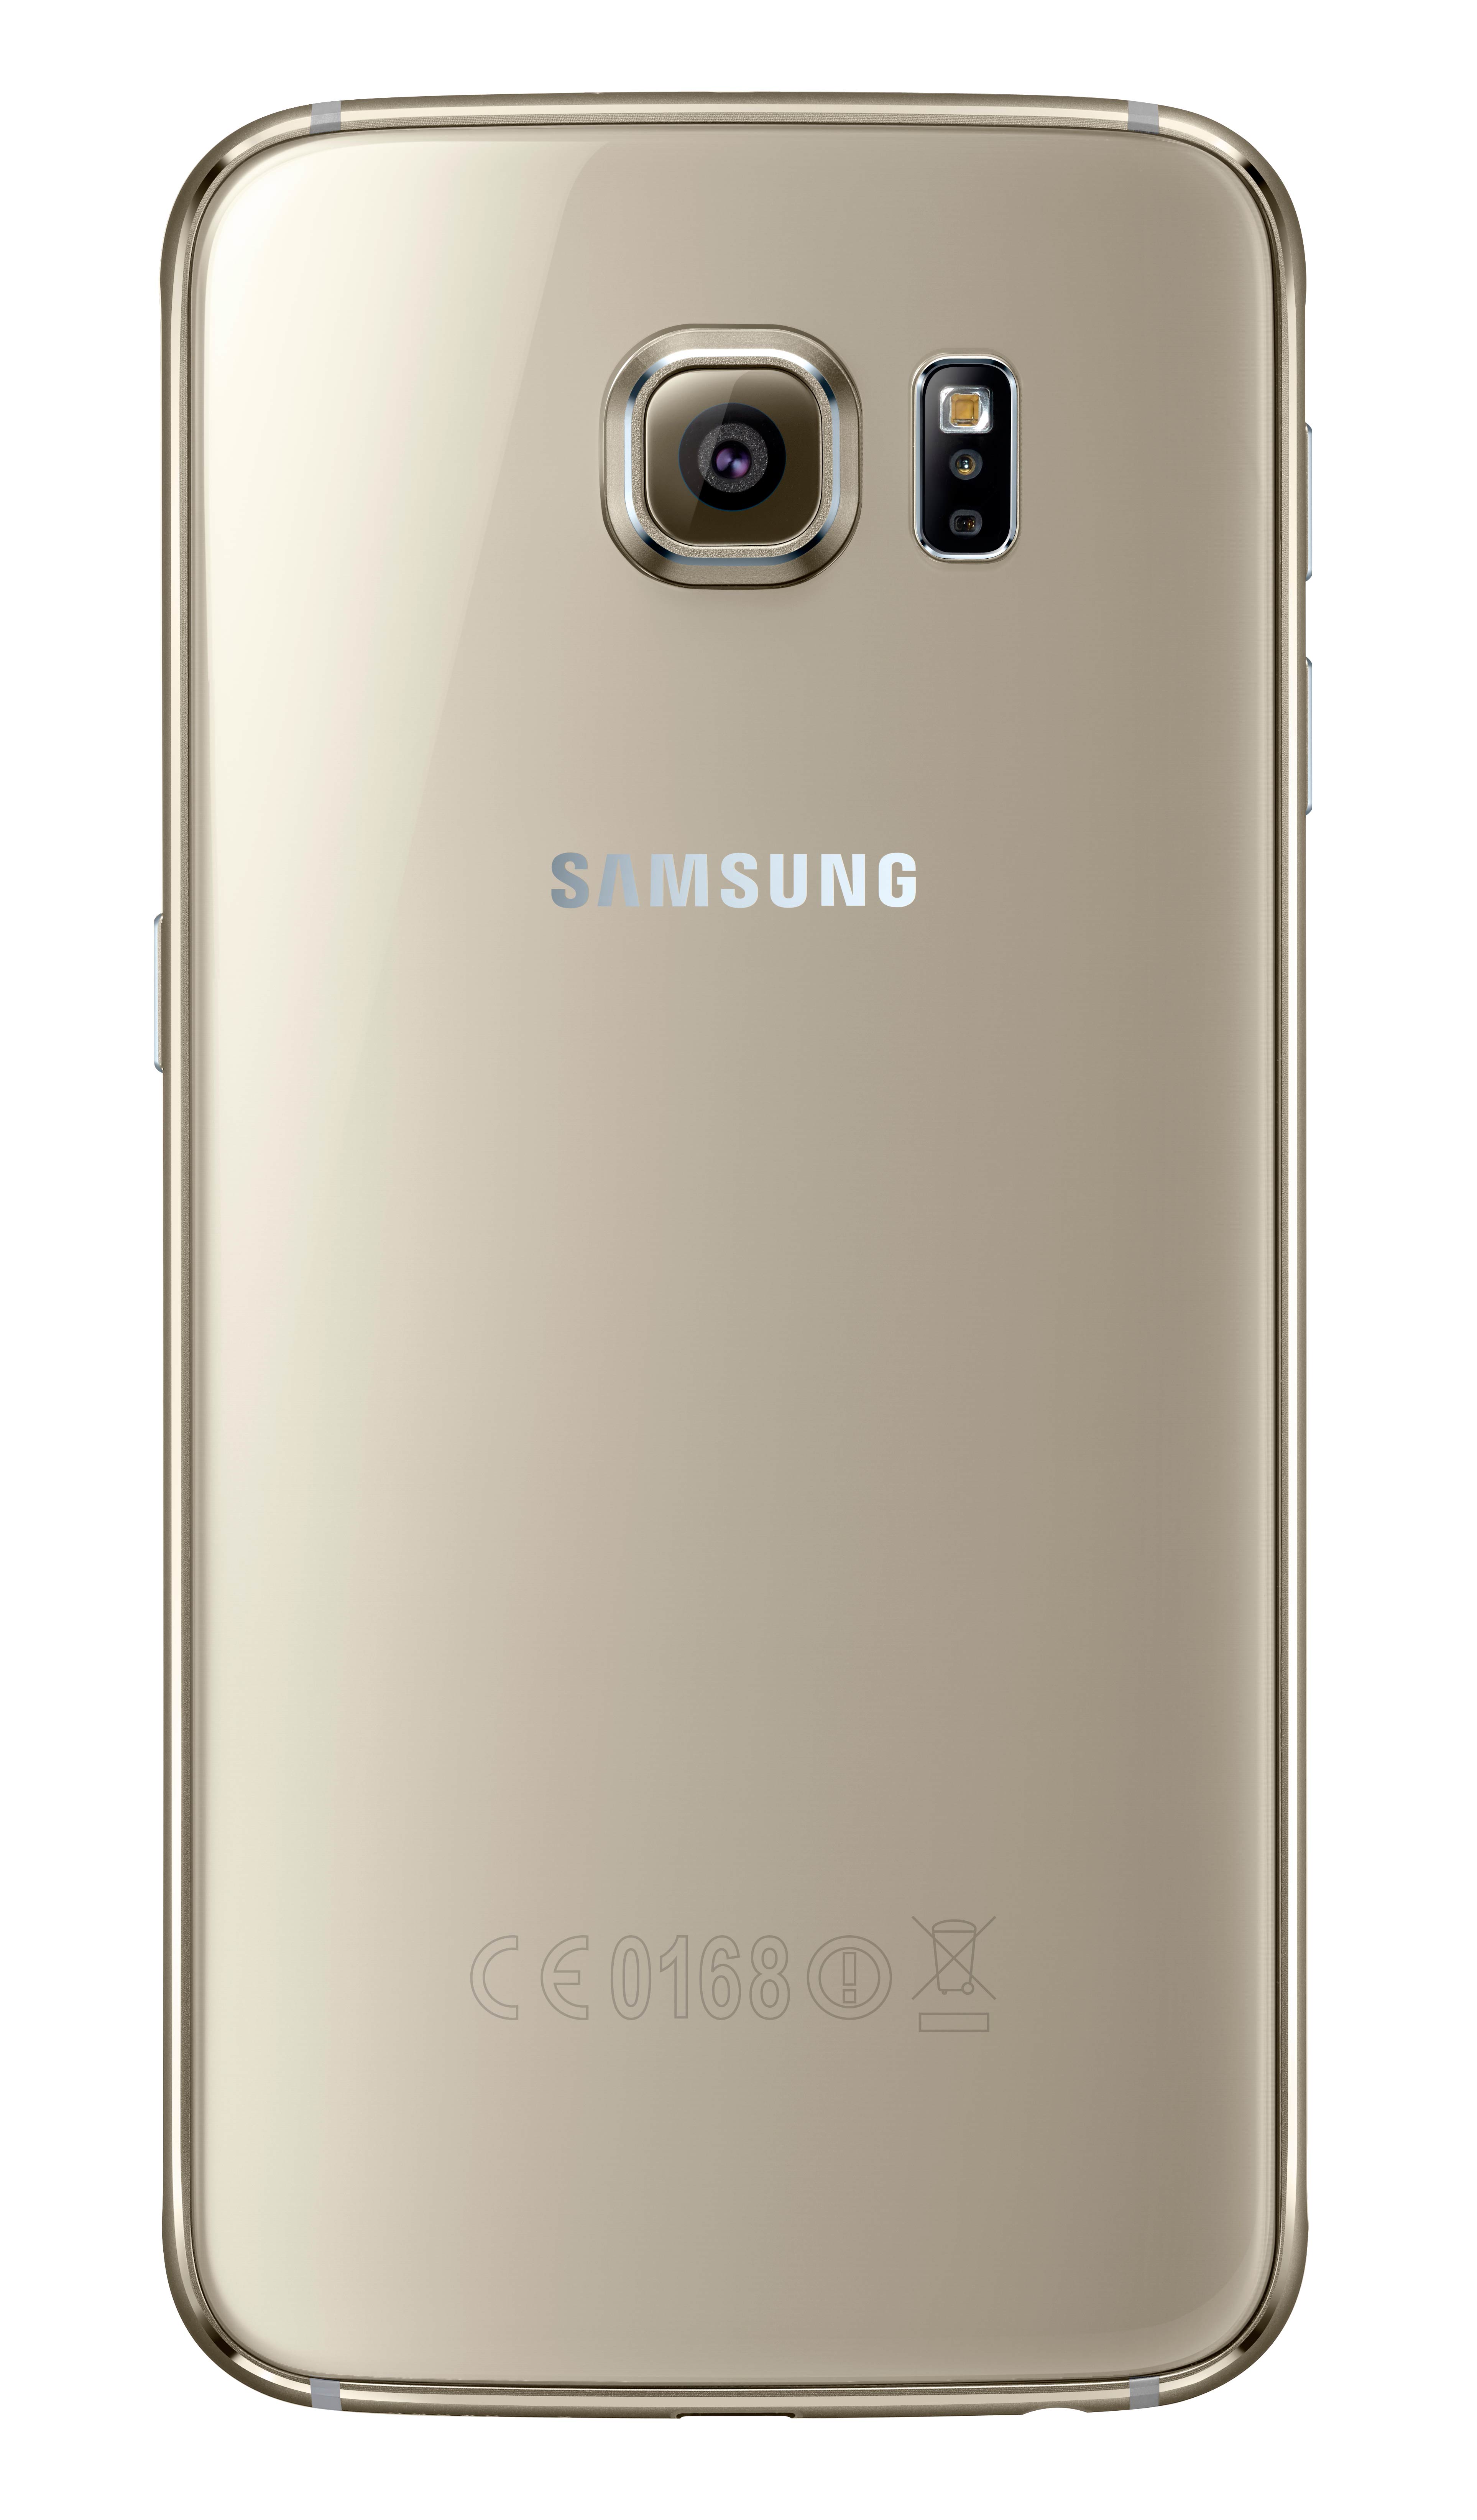 impulso mantequilla Cruel Which Galaxy S6 Color to Buy: Gold, White or Black?